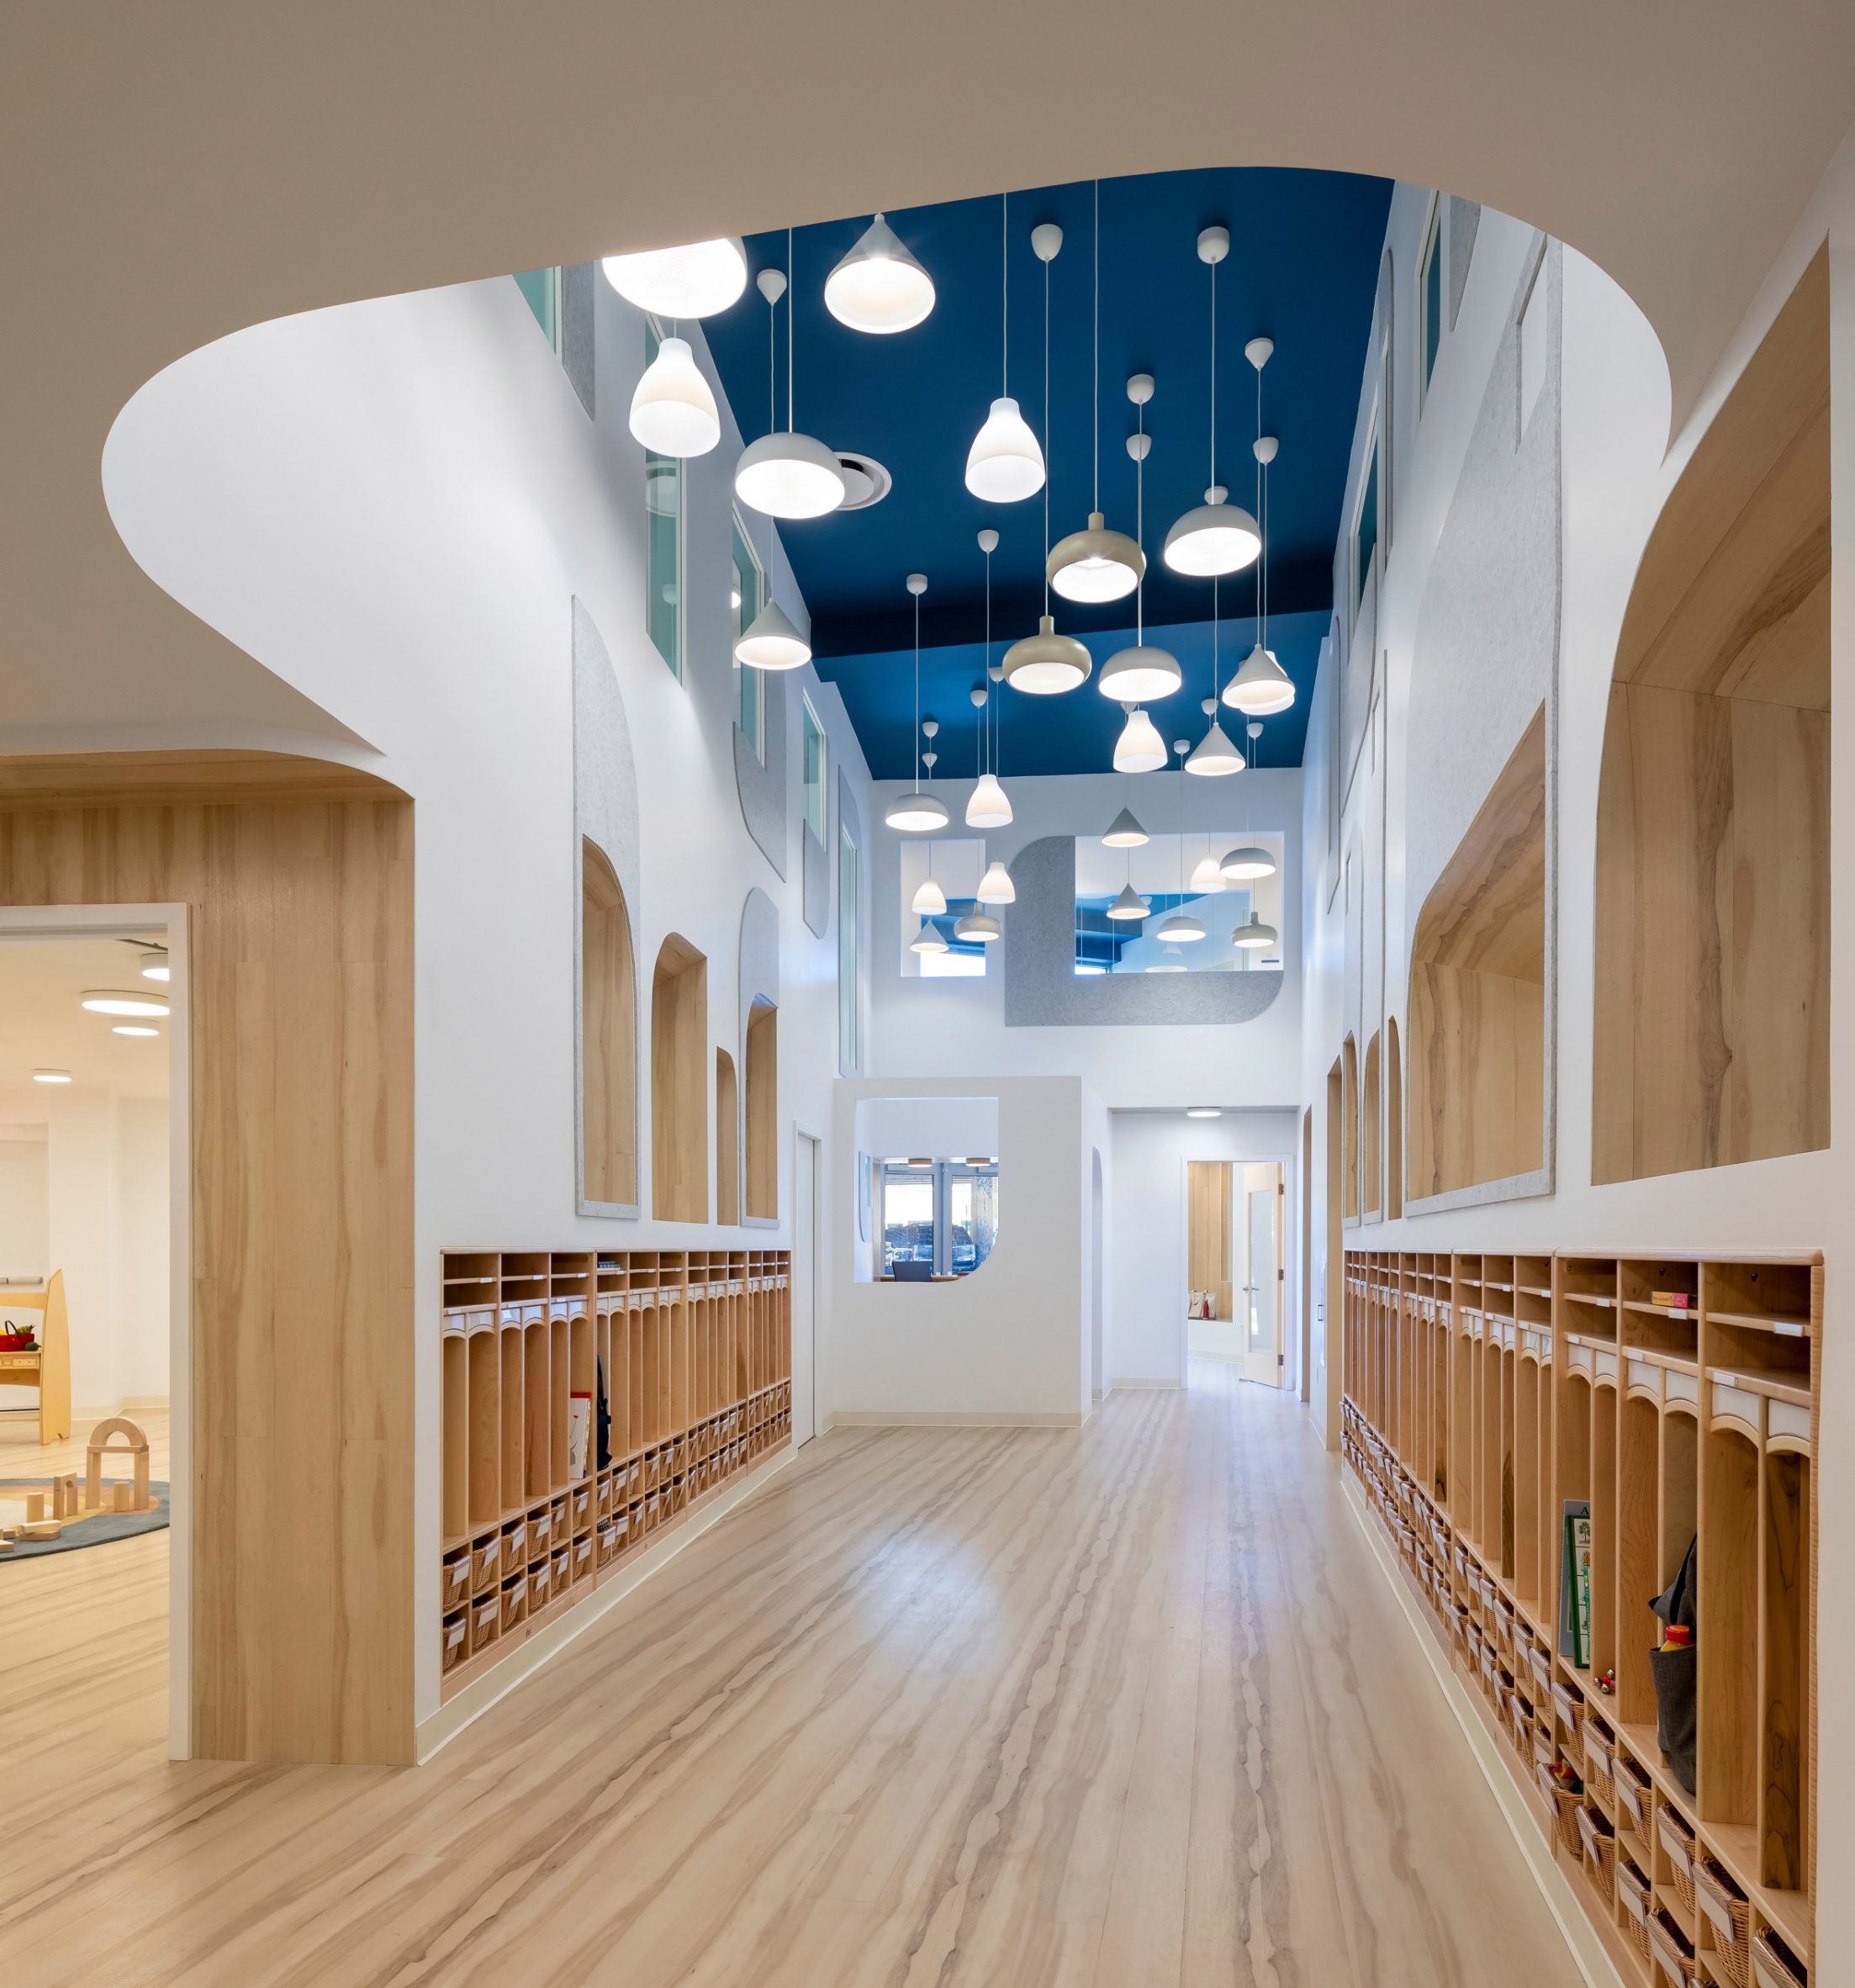 Nubo Indoor Play Center by PAL Design Group: 2017 Best of Year Winner for  Small Primary Education - Interior Design